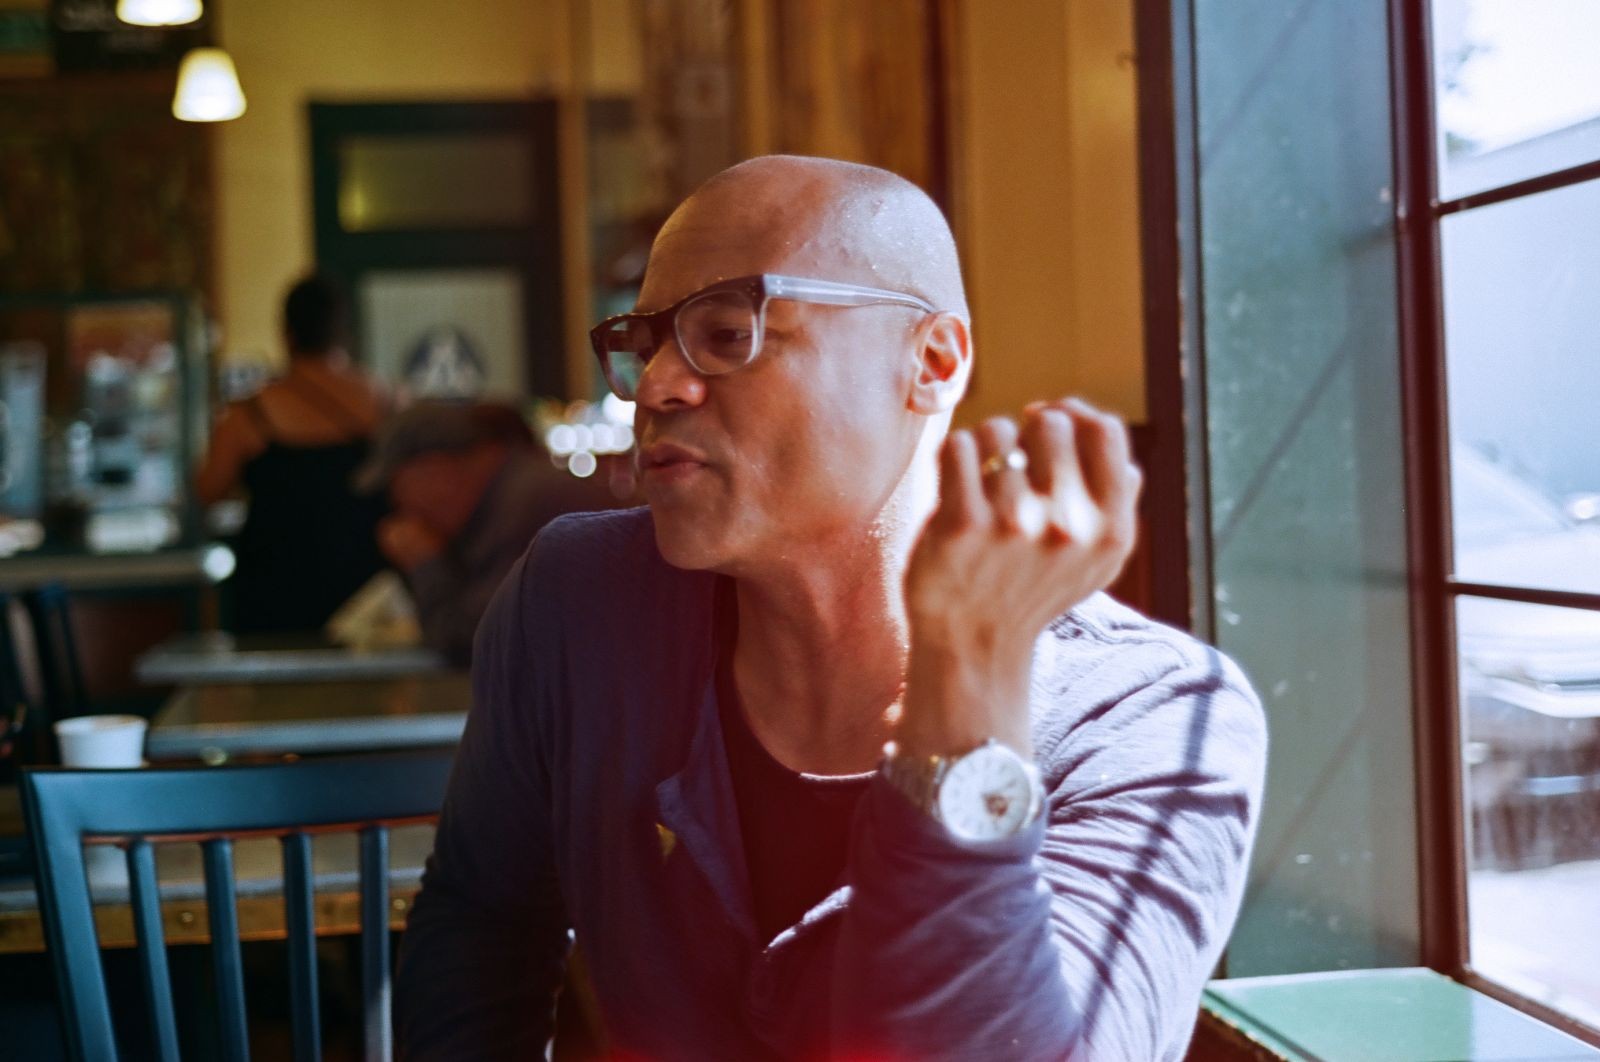 Ronaldo is featured in a landscape-oriented photograph, cropped from the waist up, seated at a table by a window in what appears to be a cafe. His is looking towards the bottom left edge of the frame in three-quarters profile. His left elbow rests on the table and his hand is poised idly in the air slightly in front of and to the side of his face.